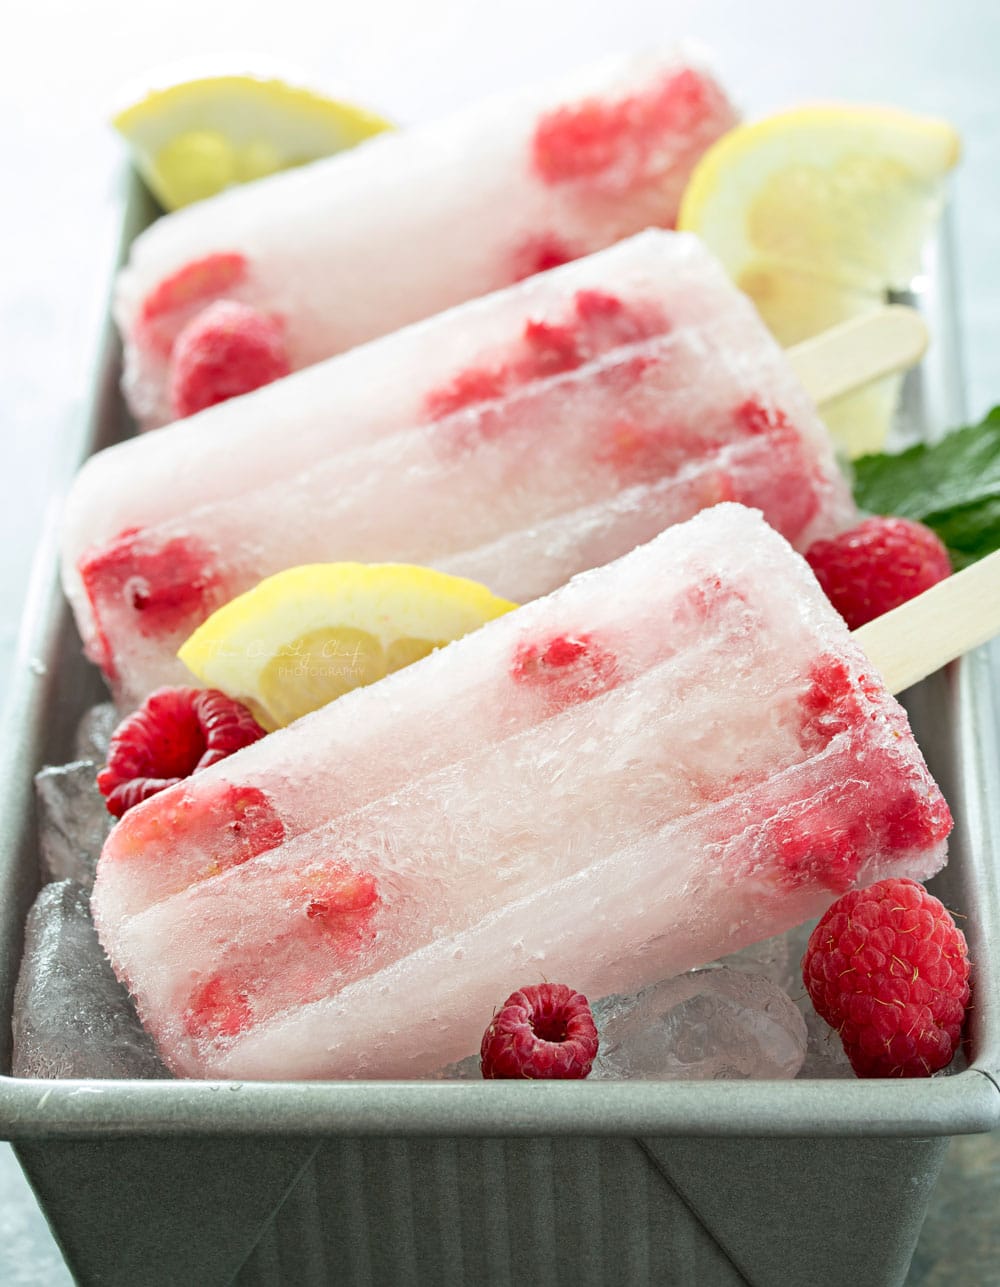 Raspberry Lemonade Popsicles | These raspberry lemonade popsicles are so easy to make! They're a refreshing way to cool down on a hot day, and loved by kids and adults!